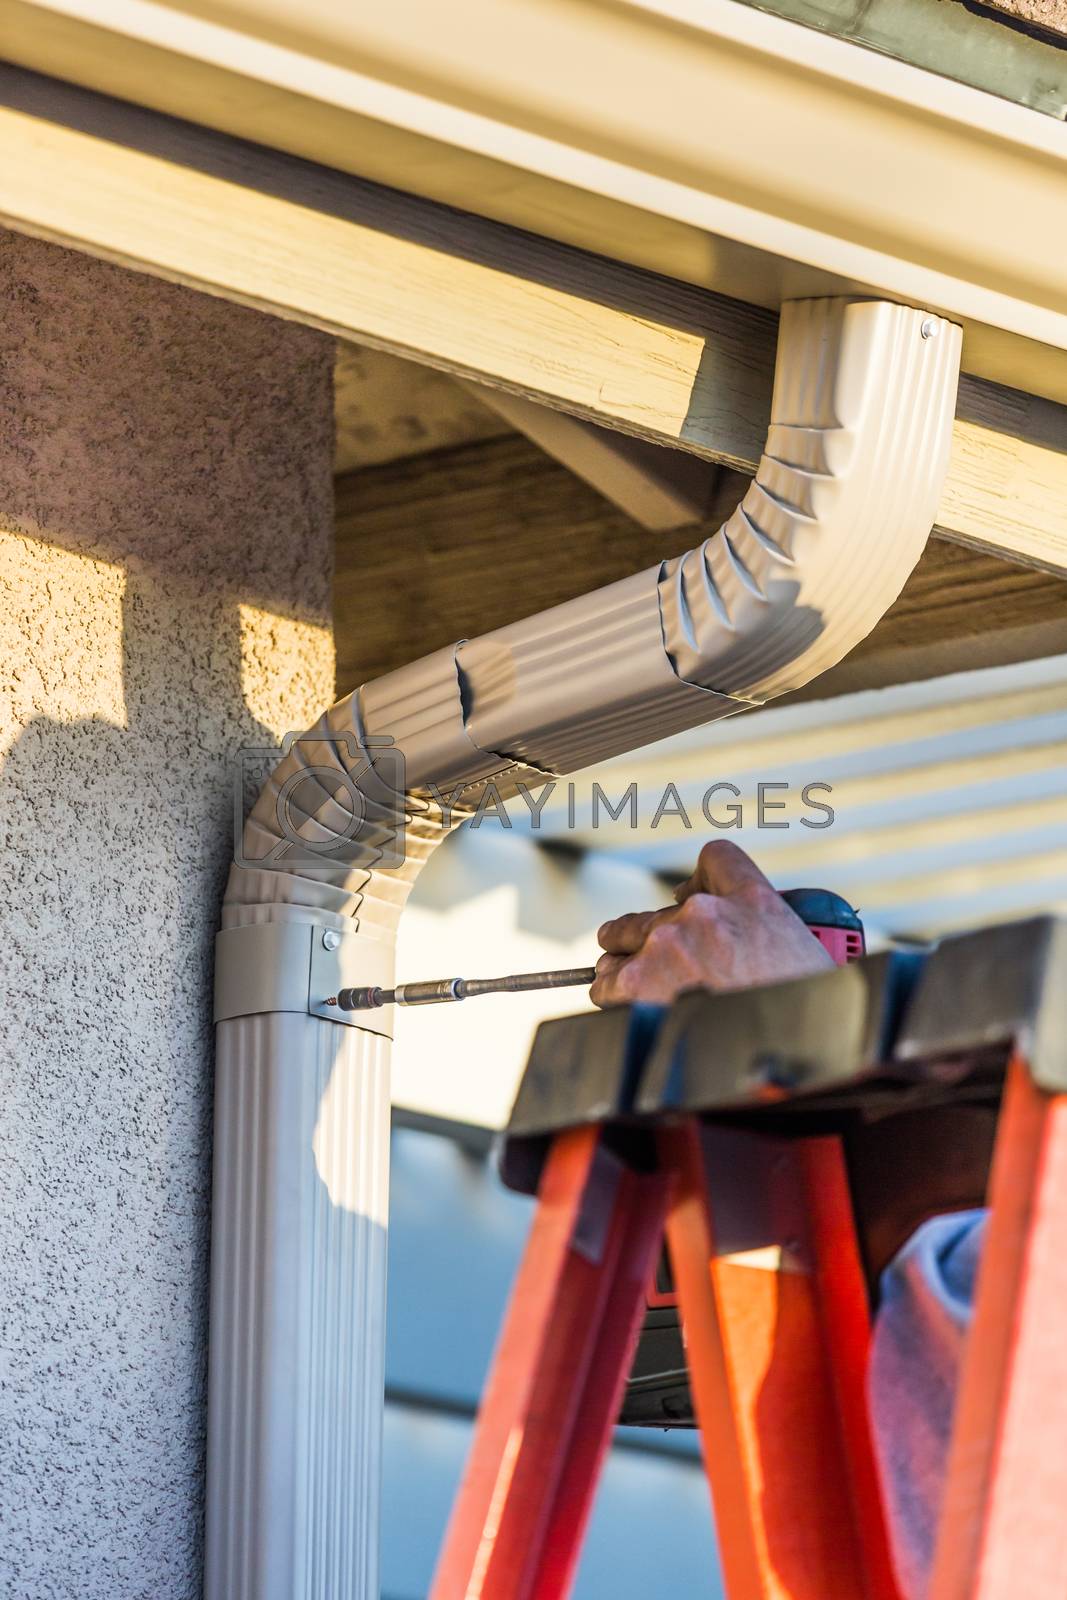 Royalty free image of Worker Attaching Aluminum Rain Gutter and Down Spout to Fascia of House. by Feverpitched